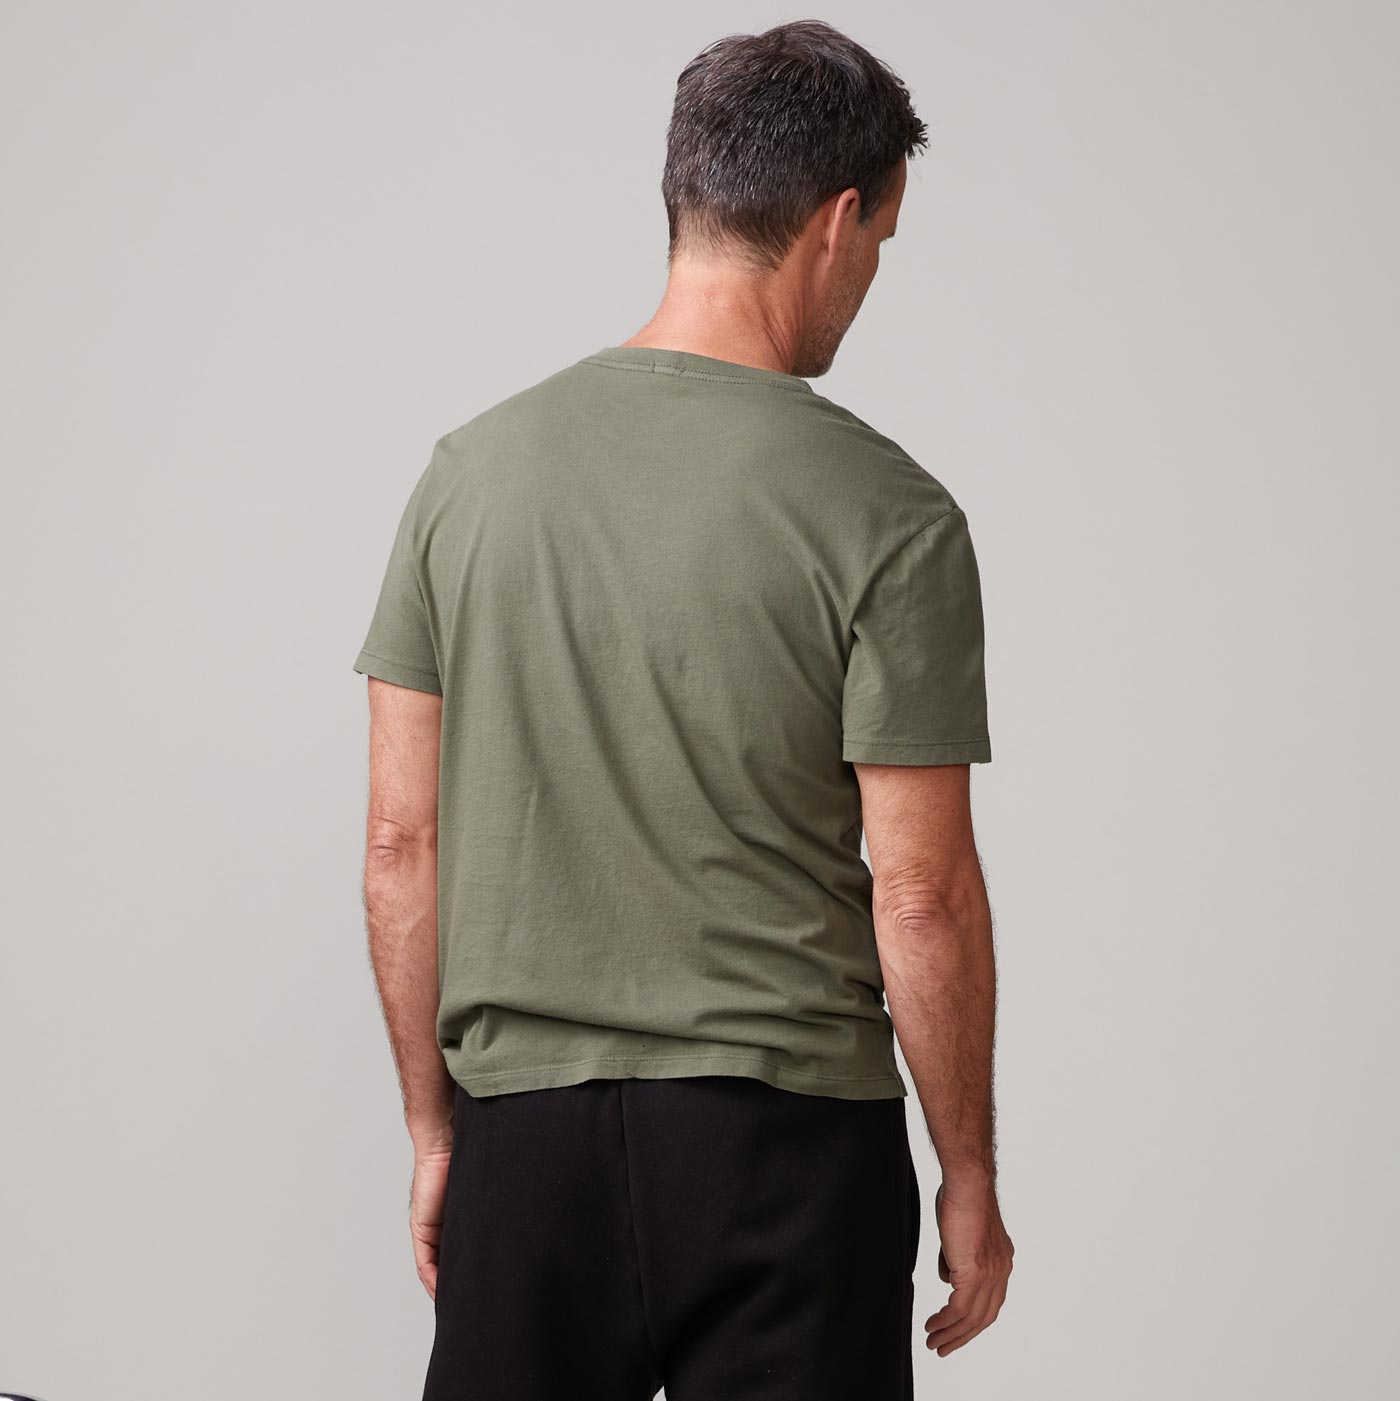 Back view of model wearing the relaxed crew in general green.